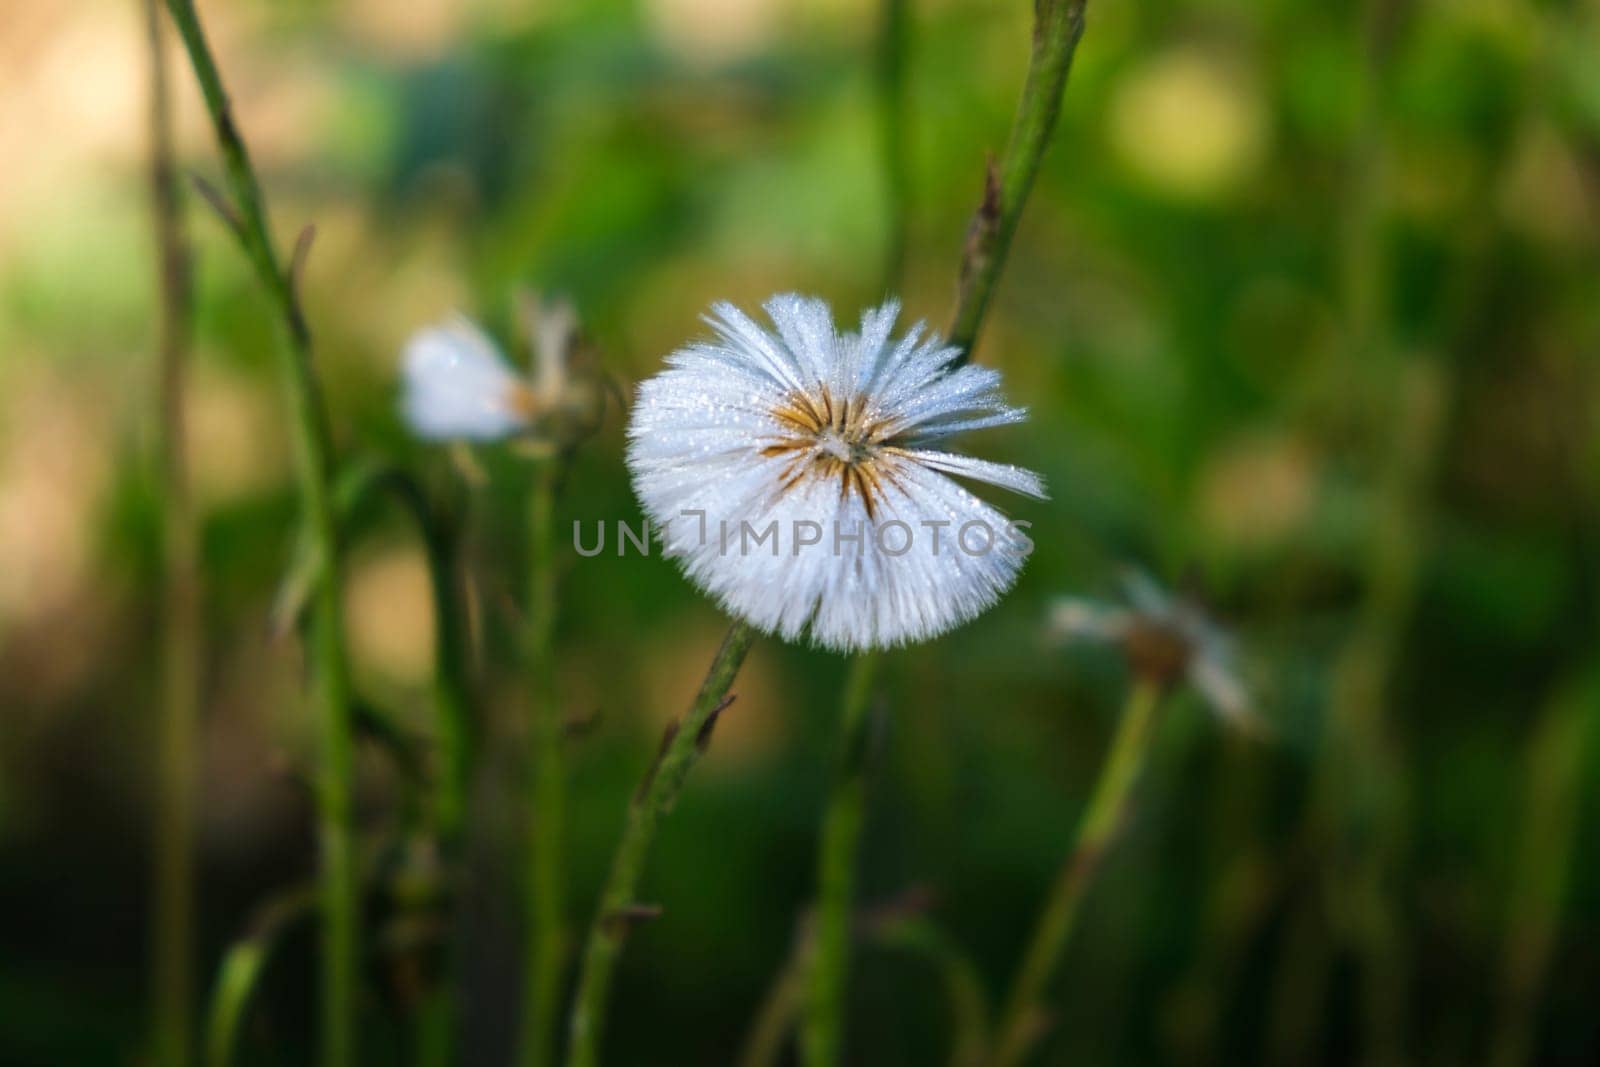 Dandelion in the grass. Coltsfoot is one of the first spring flowers. The white feathery seed pods of the coltsfoot, Traxacum, are a good food source for birds. download photo